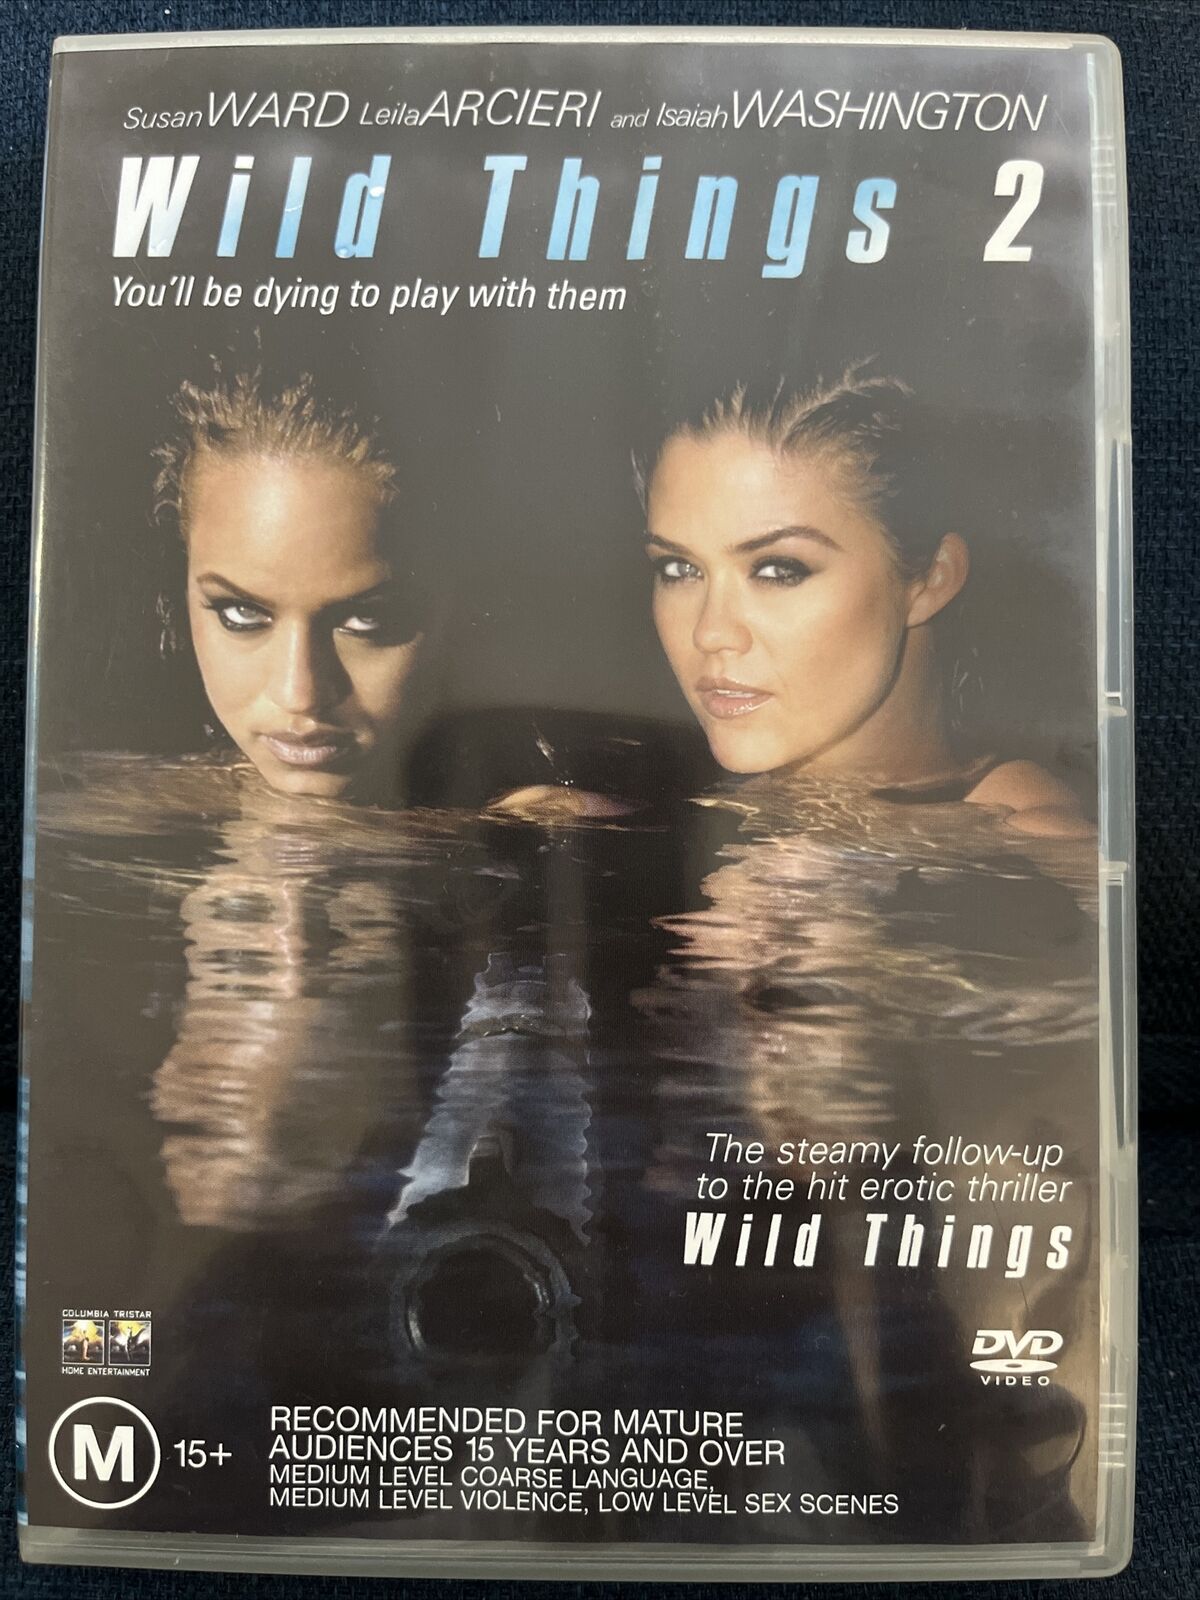 claude mazerolle recommends Wild Things 2 Sex